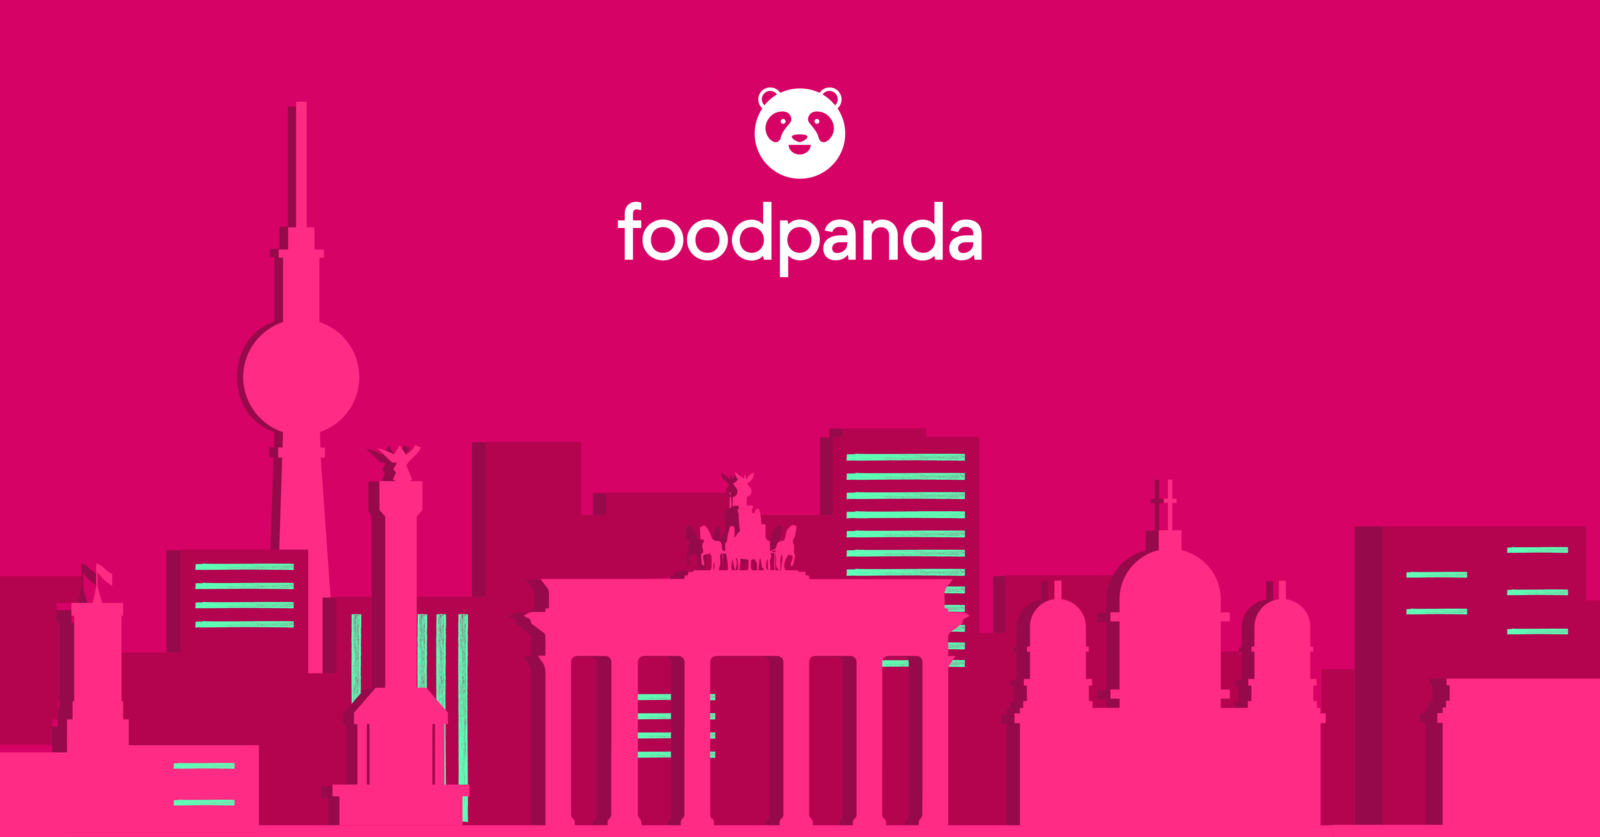 delivery hero brings foodpanda to the streets of berlin and announces german expansion – delivery hero